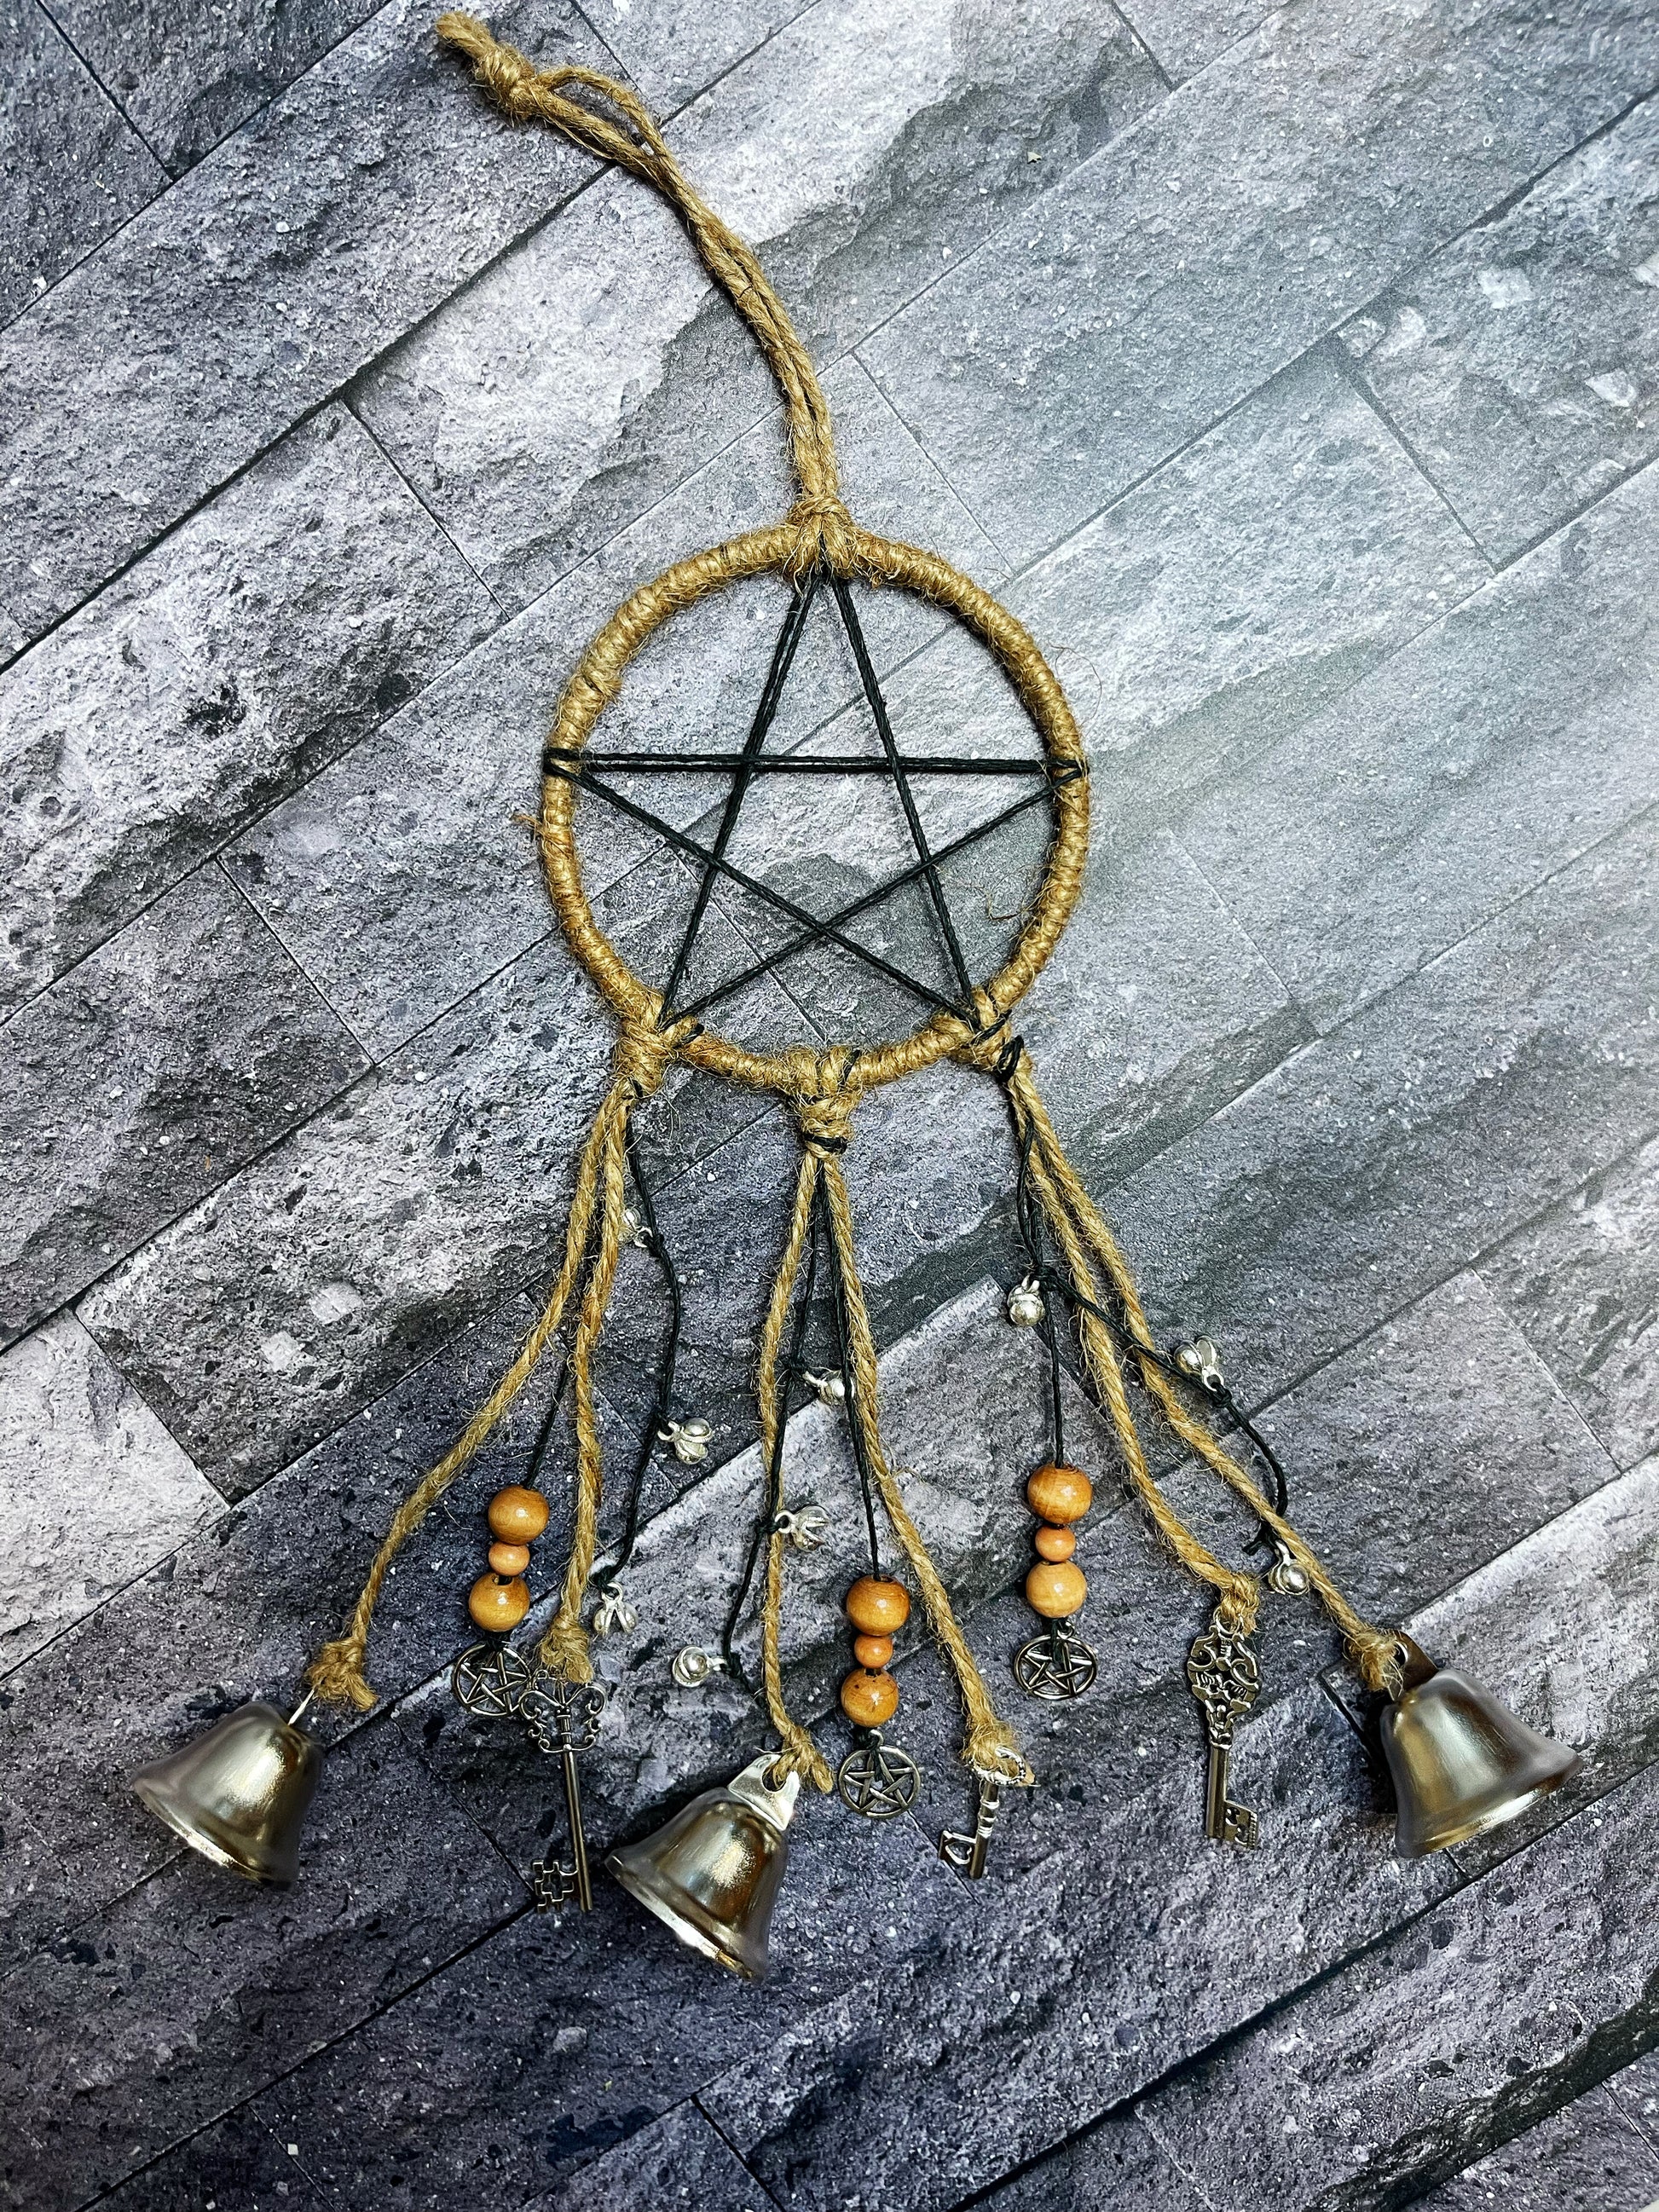 Key Witches Bells, Witch Bells, Witch Protection, Door Protection 